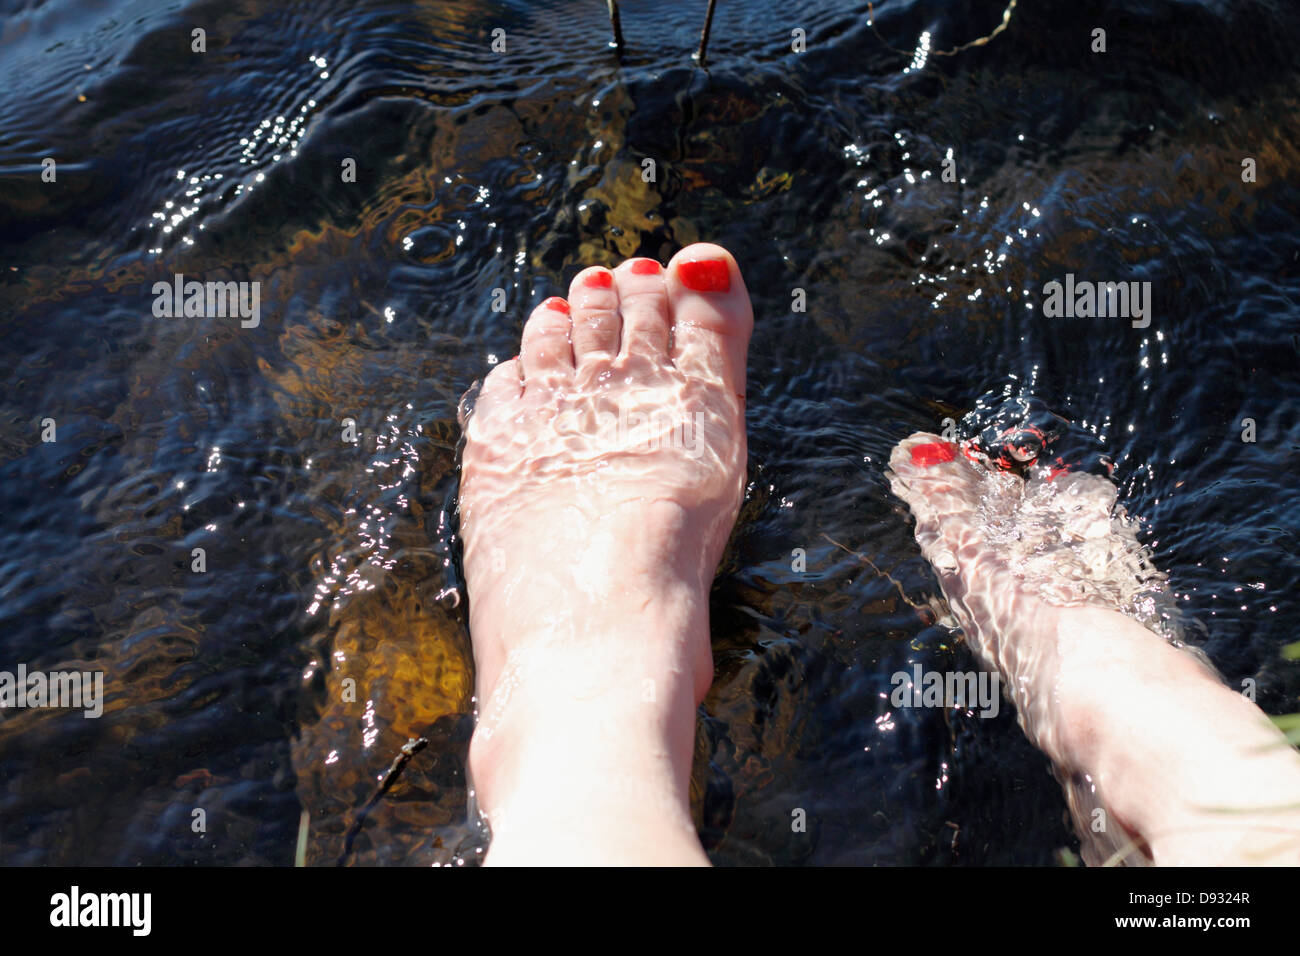 Foot in water Stock Photo